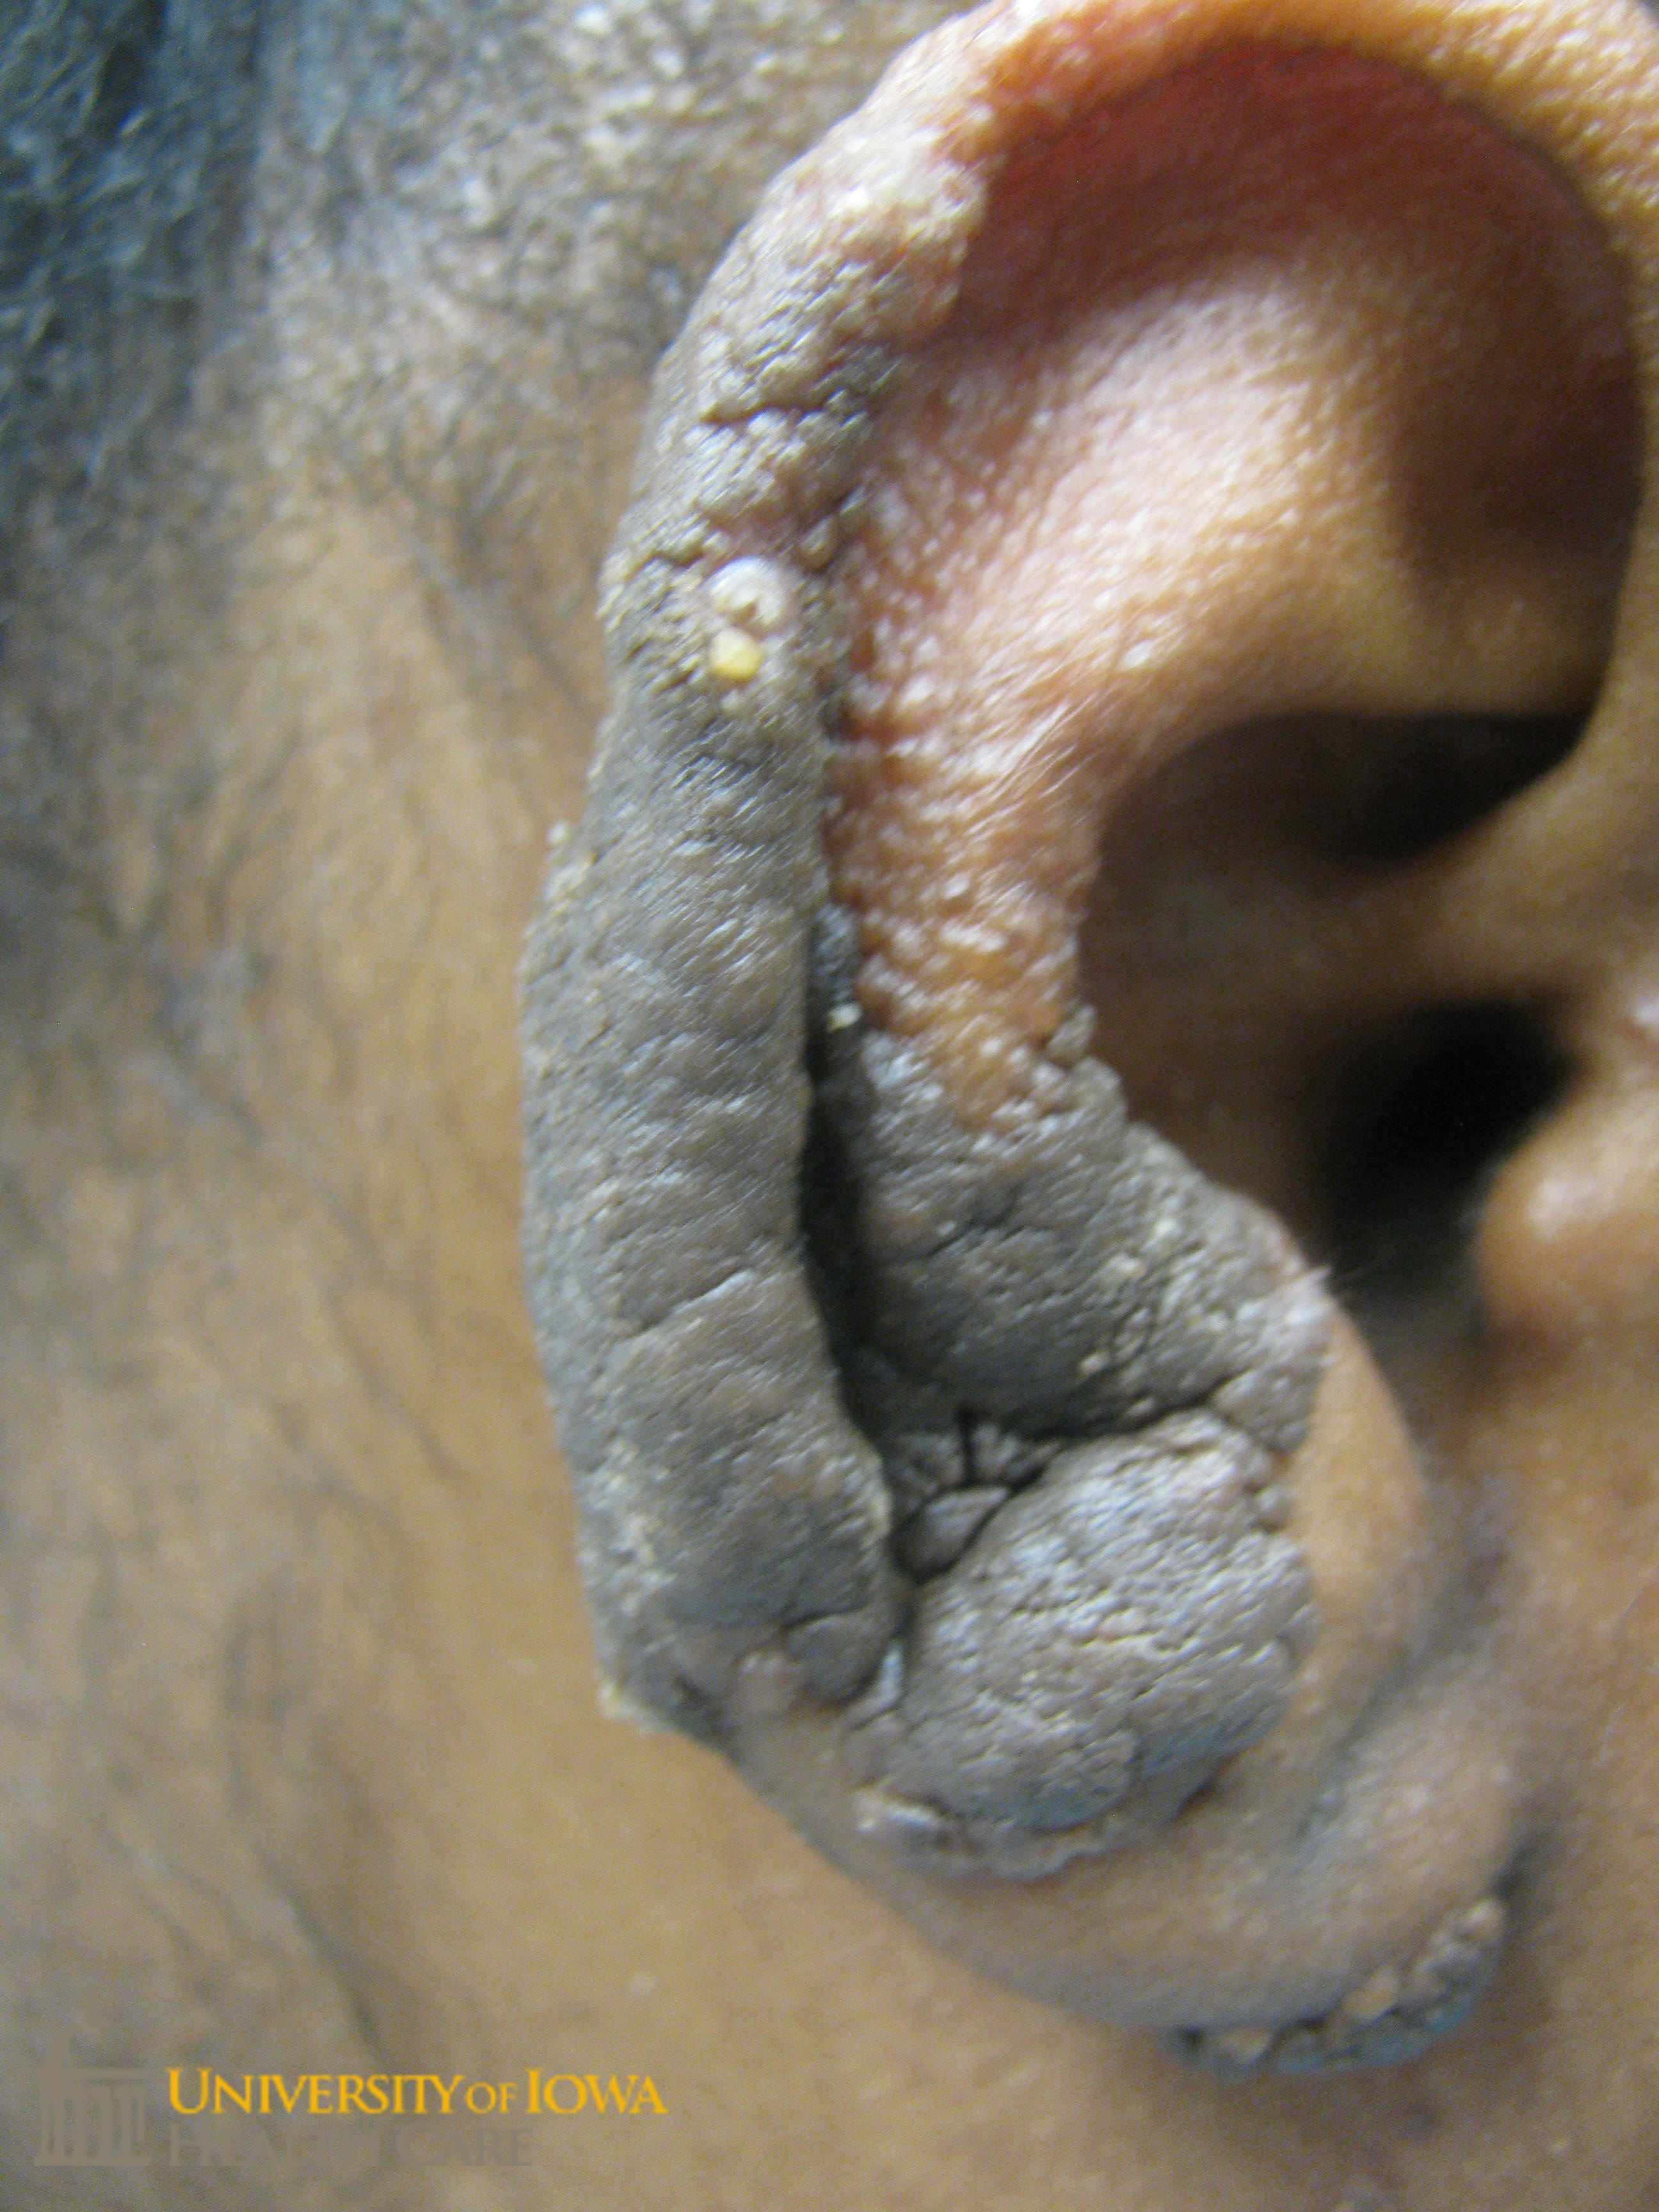 Dark brown, thick verrucous plaque on the ear. (click images for higher resolution).